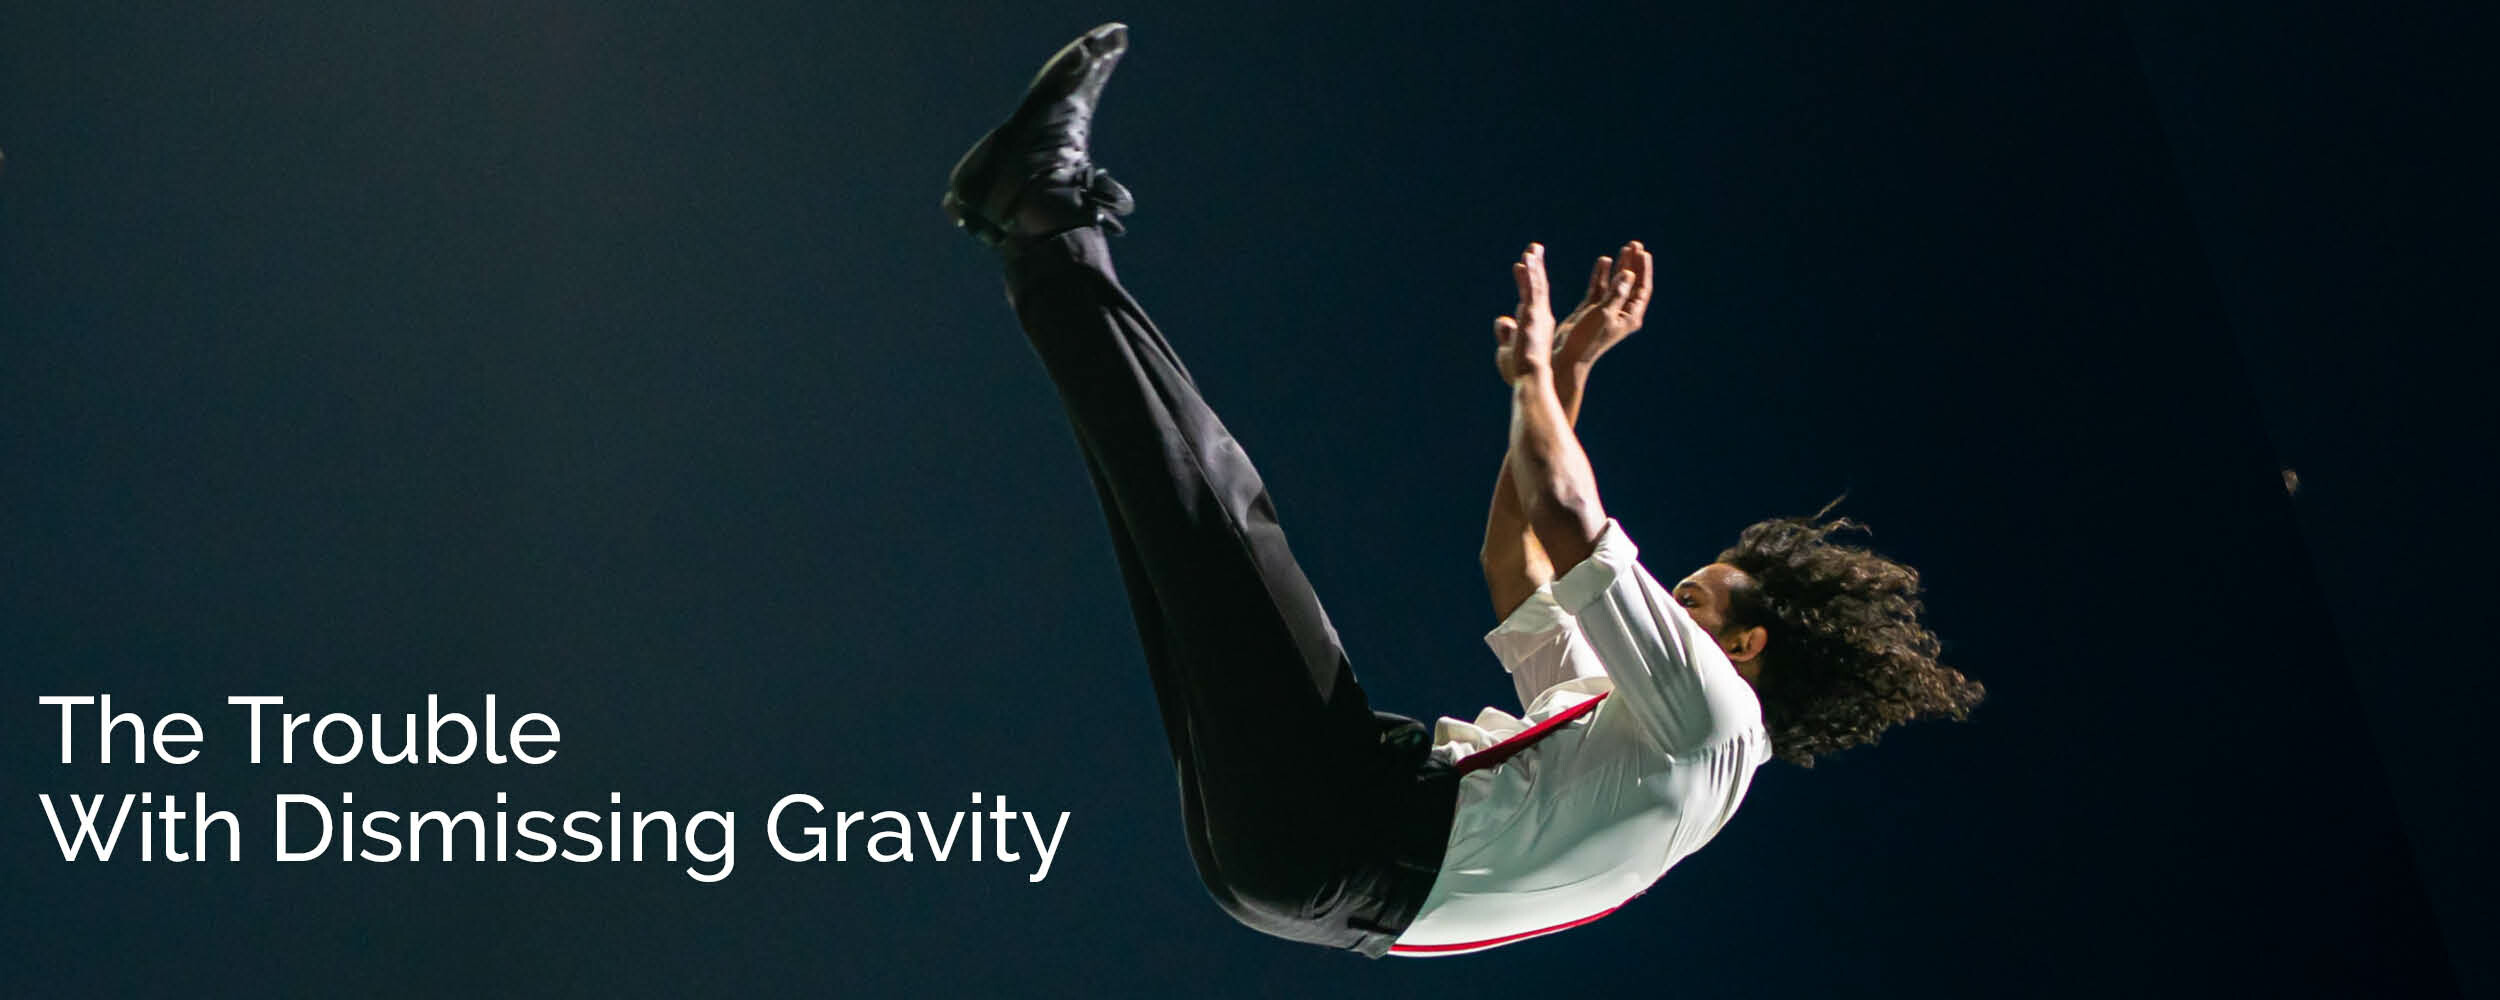 The Trouble With Dismissing Gravity